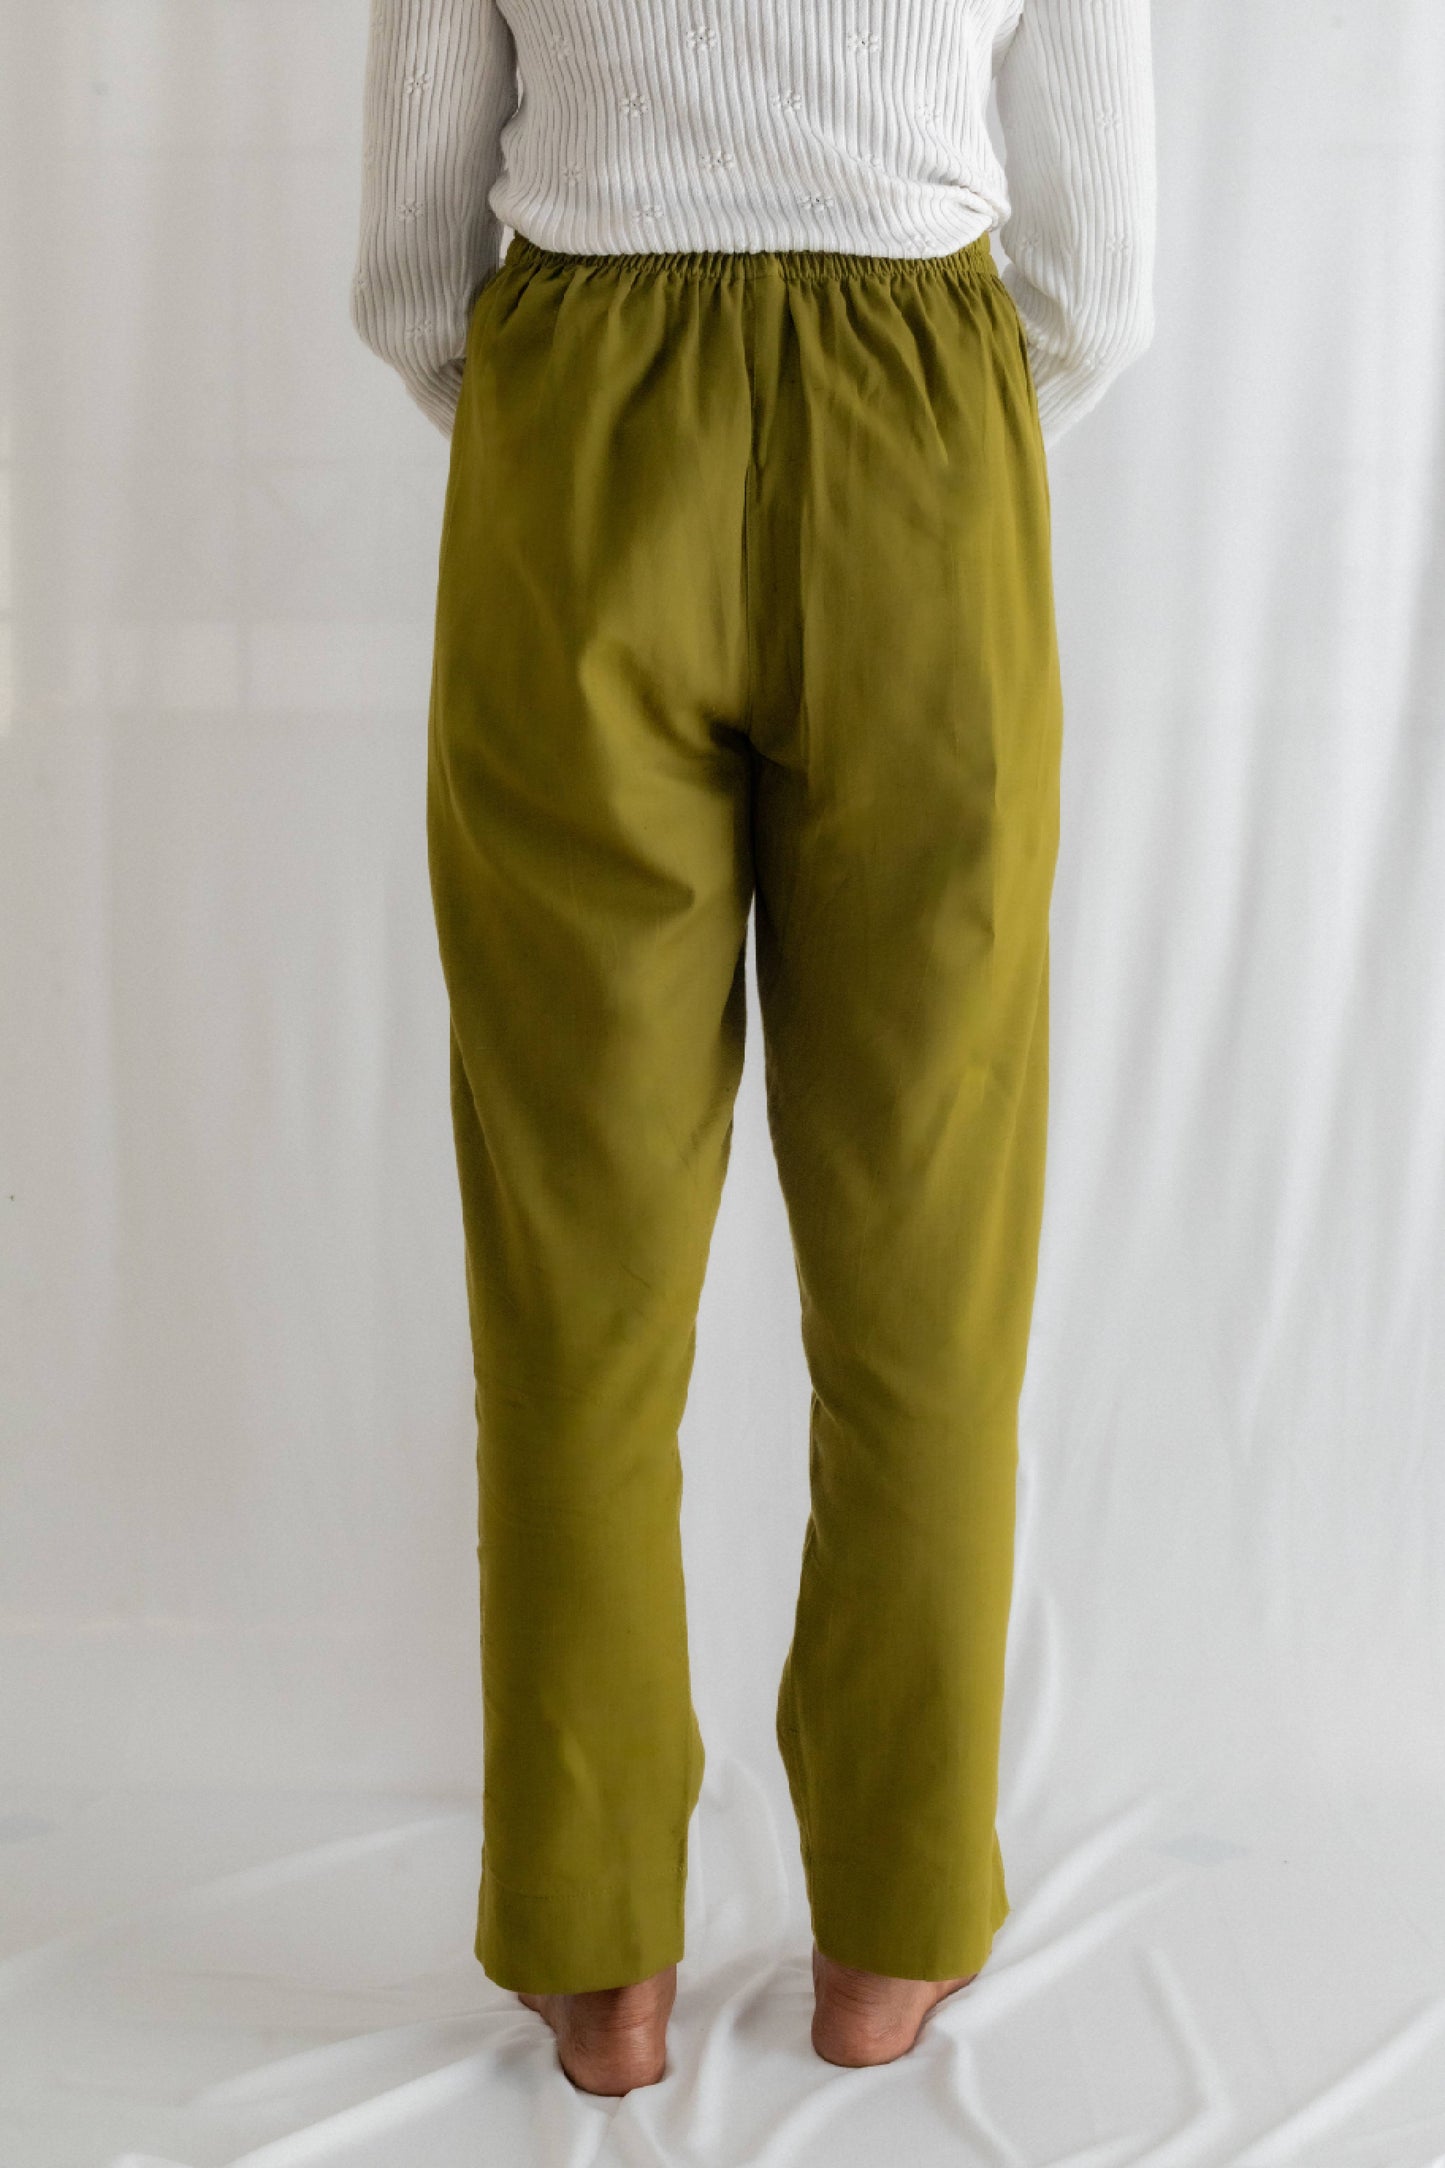 Solid Olive Green Cotton Pant For Women